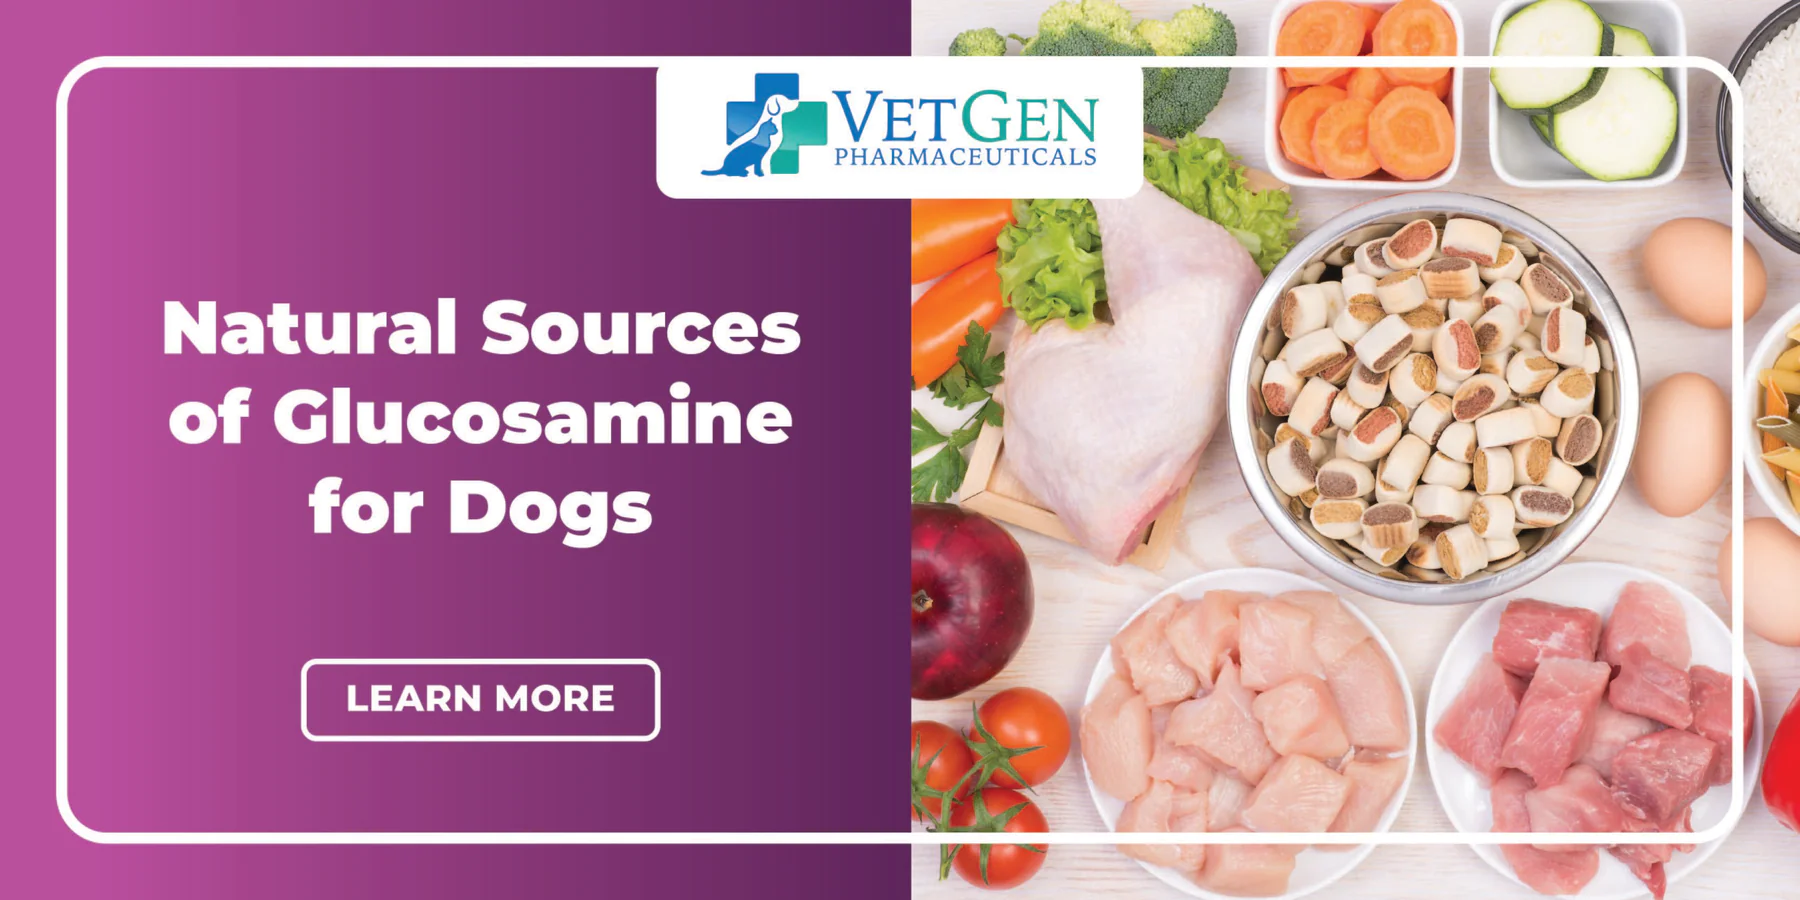 Natural Sources of Glucosamine For Dogs - Debunking Common Misconceptions